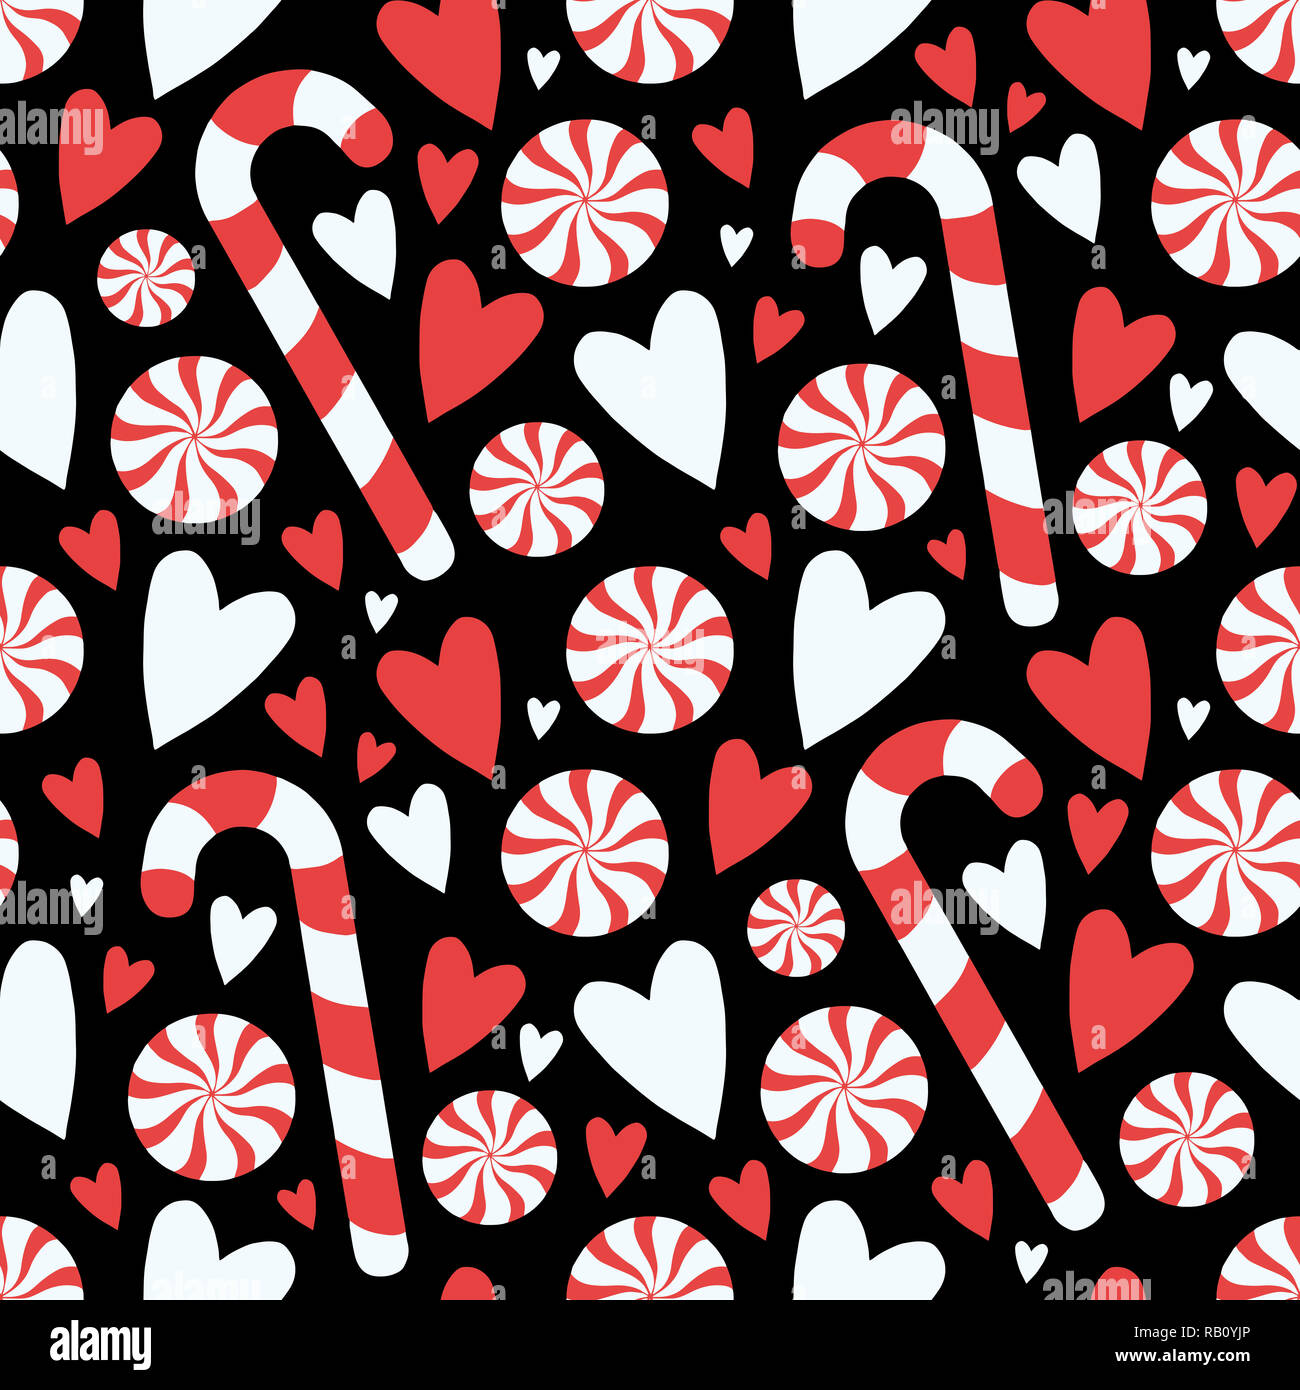 Cartoon style black candy cane and peppermint twist with hearts seamless seasonal Christmas graphic illustration pattern Stock Photo